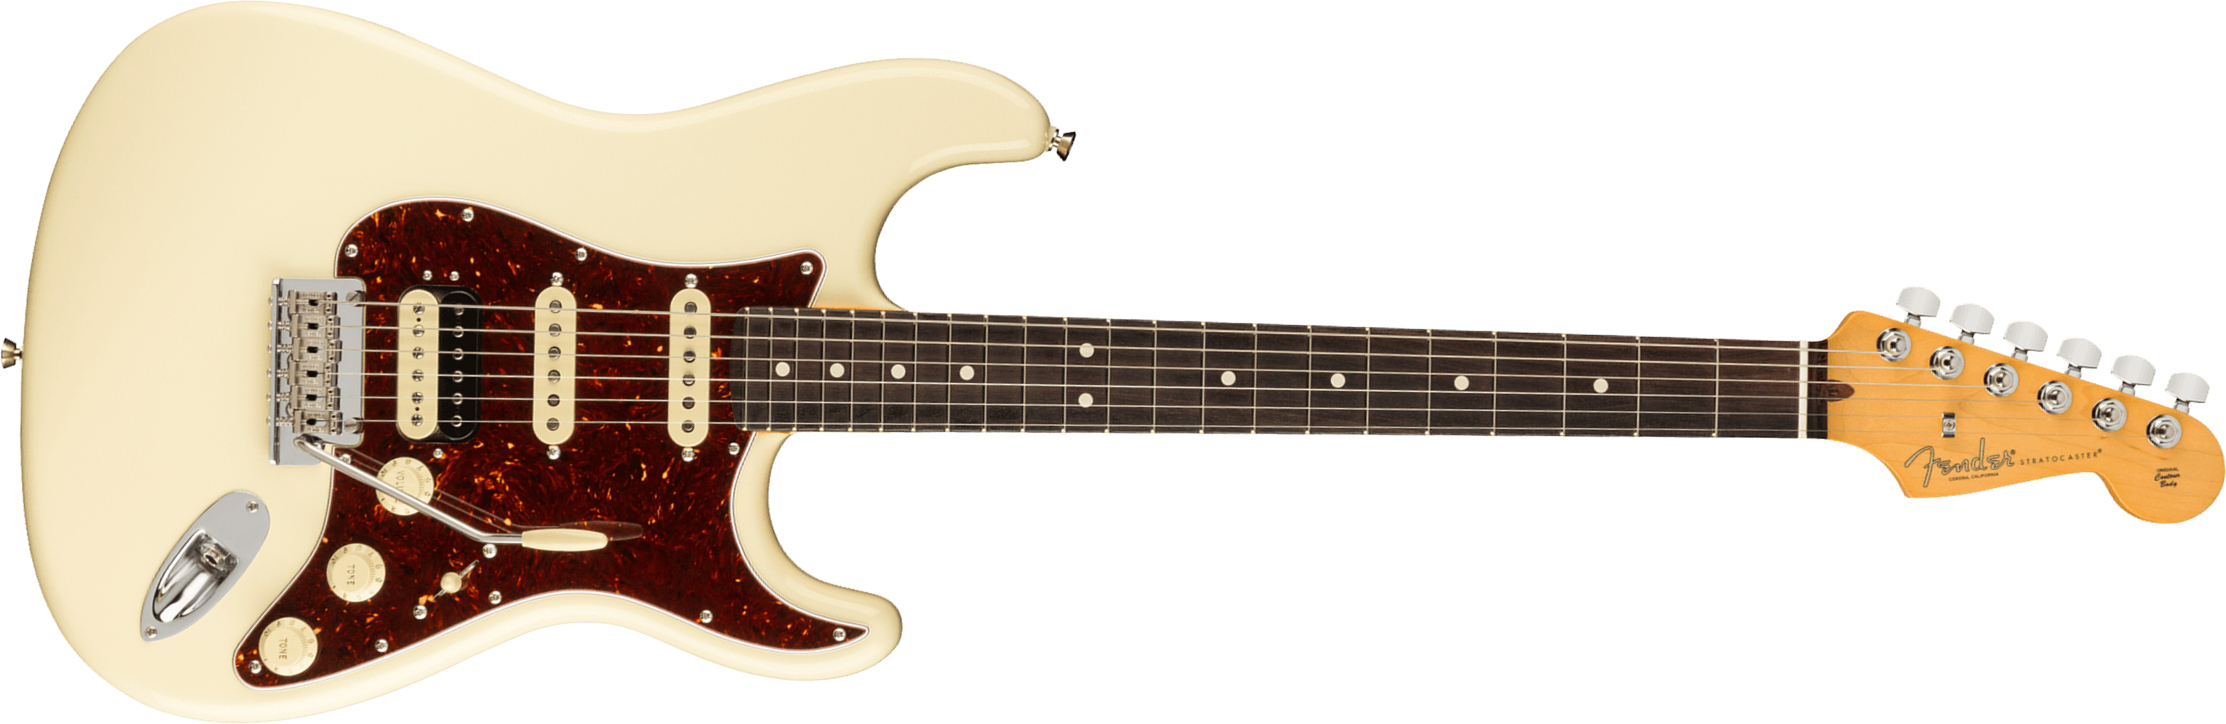 Fender Strat American Professional Ii Hss Usa Rw - Olympic White - E-Gitarre in Str-Form - Main picture